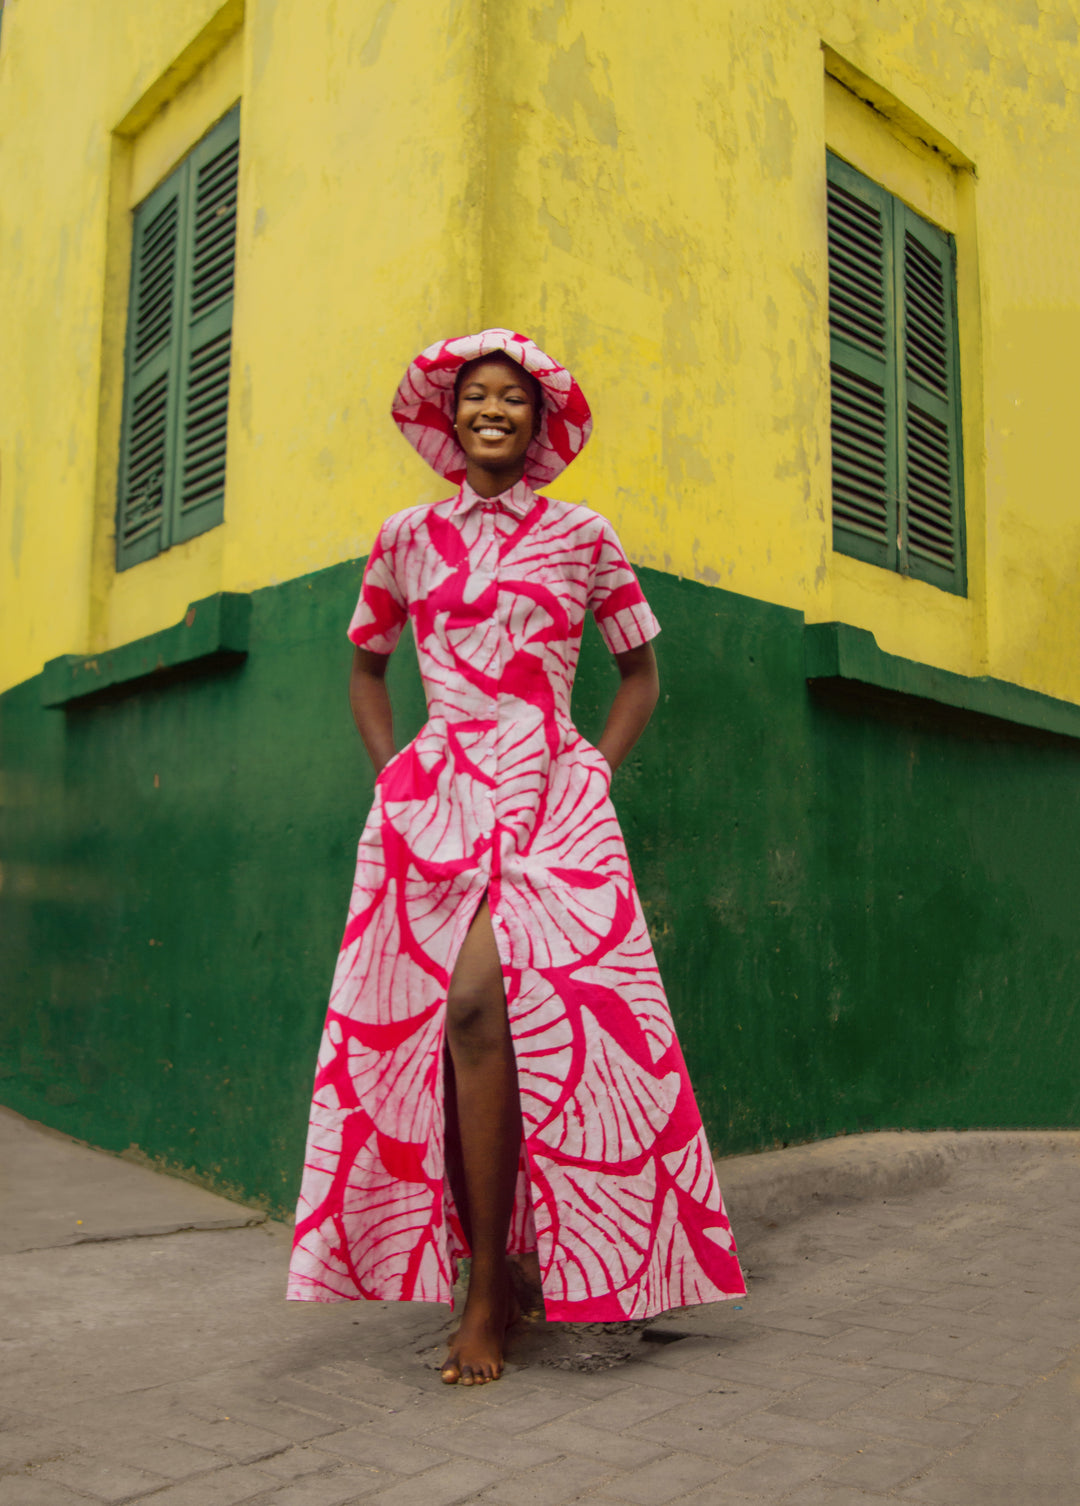 Ghana, Fashion, Africa, diaspora, cotton, dresses, GOWNS, skirts, shirts, tops, womenswear, womens, Handmade, bag, West Africa, Gift, travel, vacation, beach, picnic, pool, swim, sand, family, trip, luxury, resort, spring, summer, concert, gala, event, party, brunch, chic, custom, bespoke, plus-sized, extended sizes, inclusivity, celebration, special, cotton, packable, luxury, accessible, new, novelty, classic, professor, academia, Africana, FLORAL, print, flower